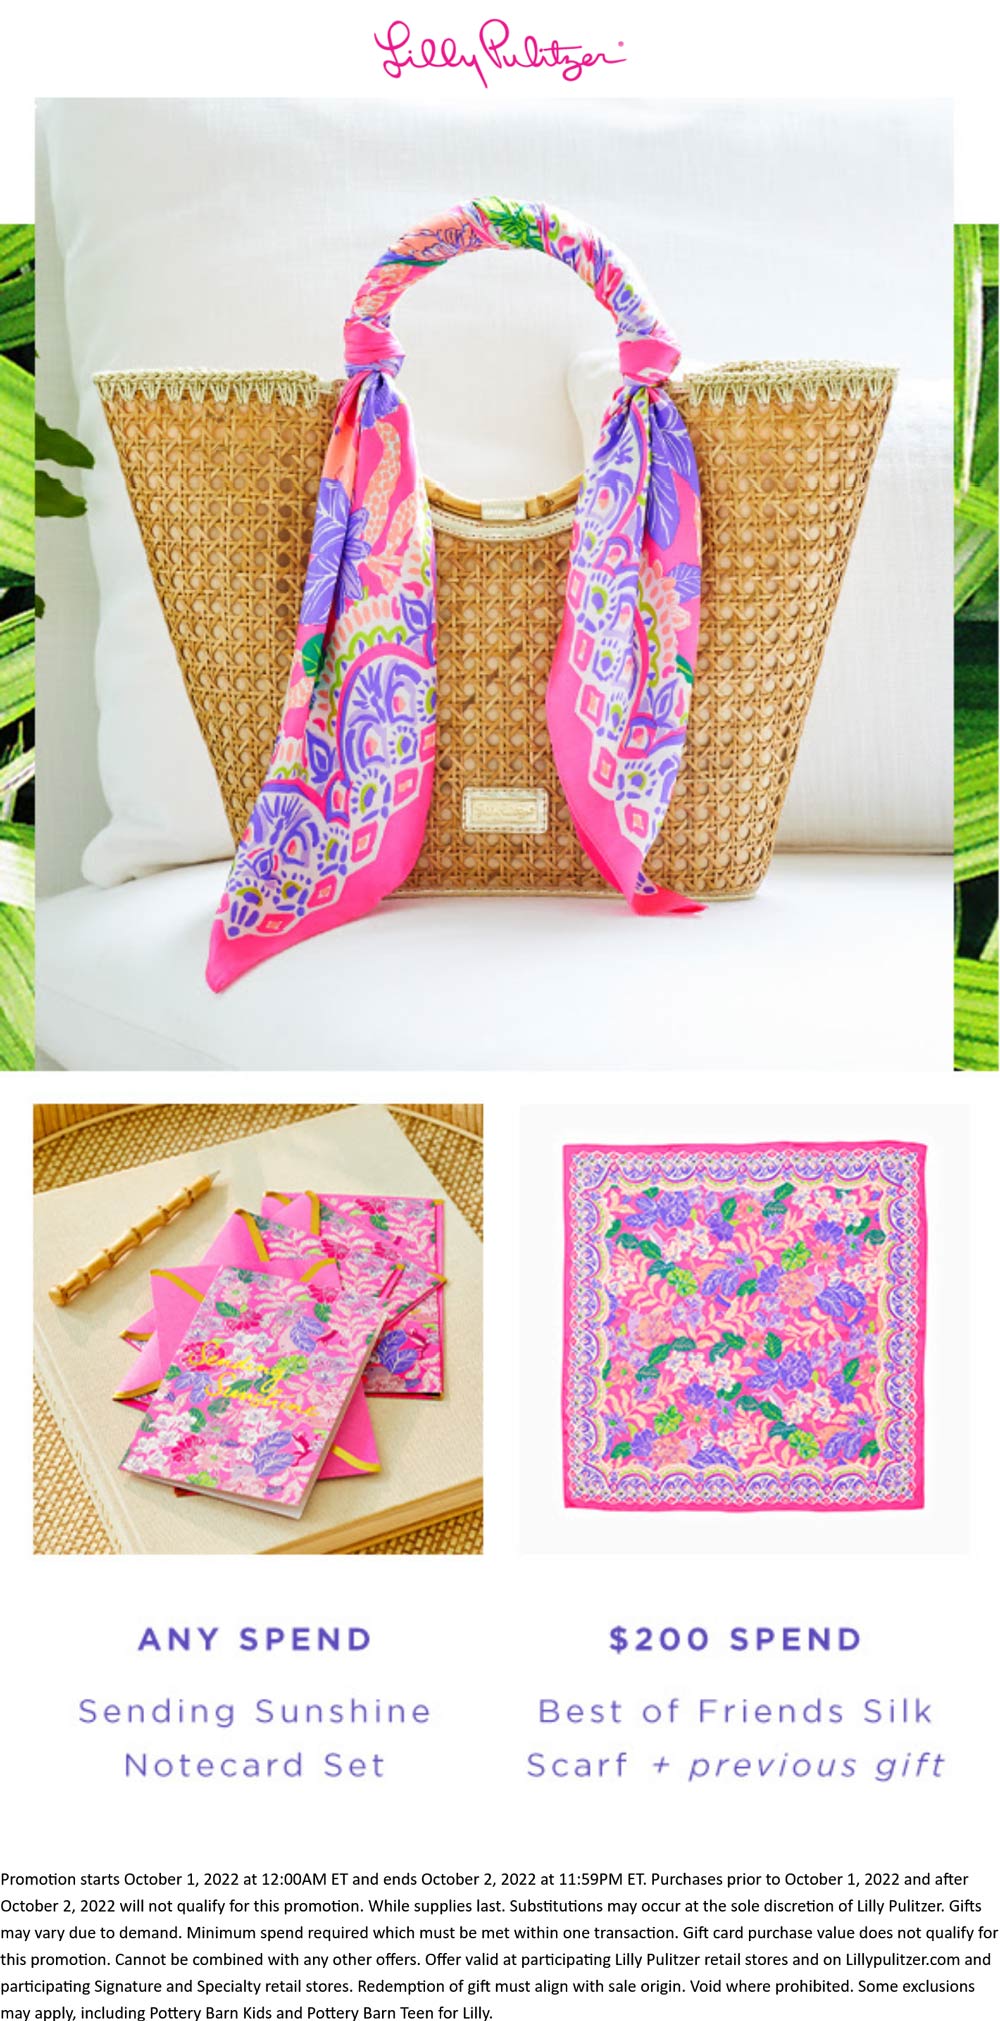 Lilly Pulitzer stores Coupon  Free notecard set with any purchase & more at Lilly Pulitzer, ditto online #lillypulitzer 